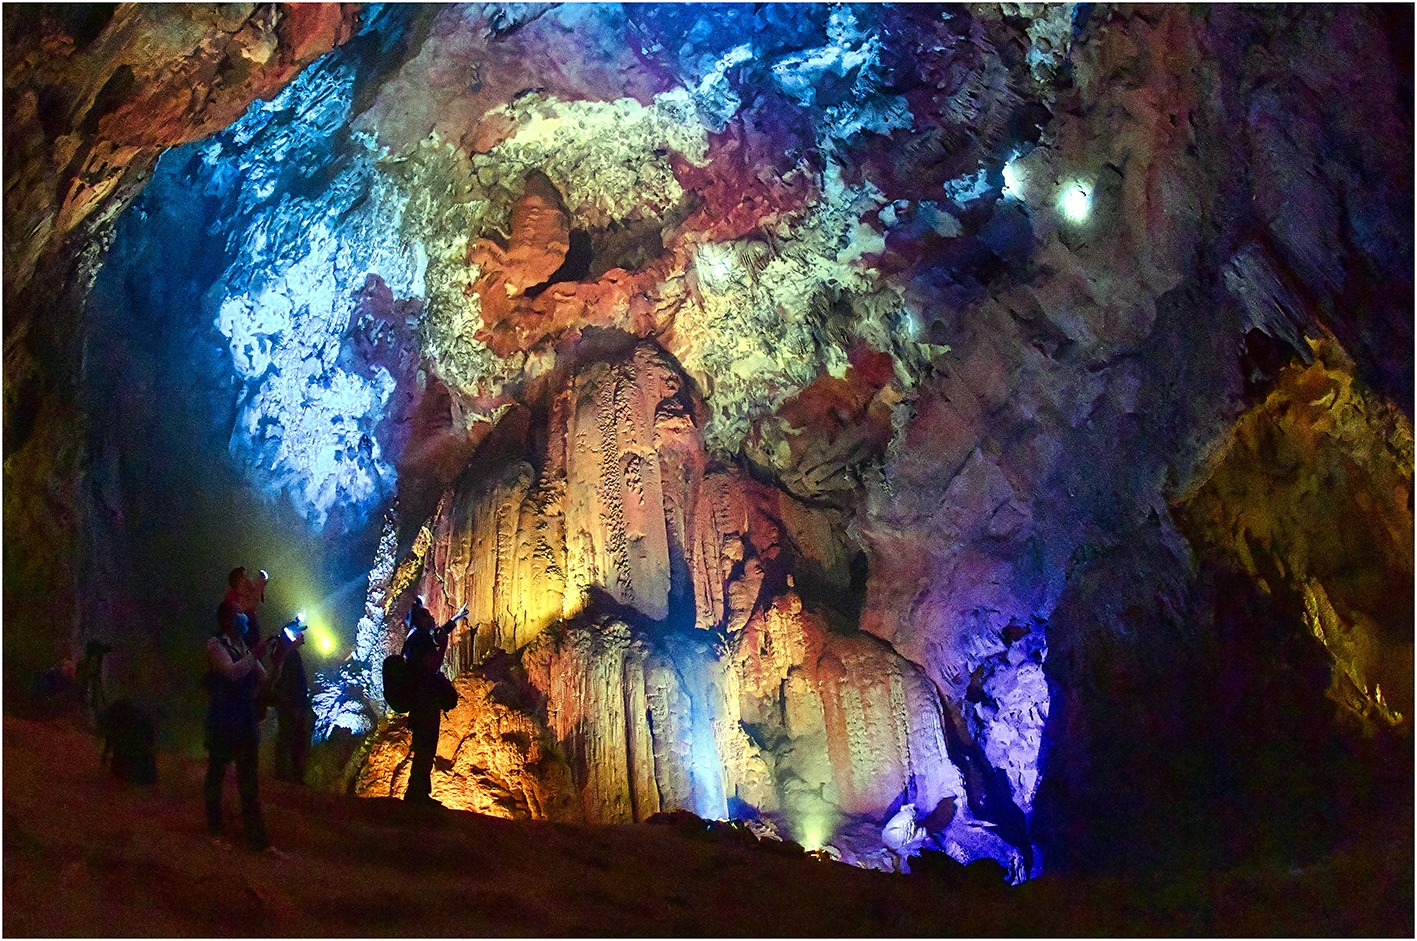 Nguom Ngao Cave in Cao Bang Province